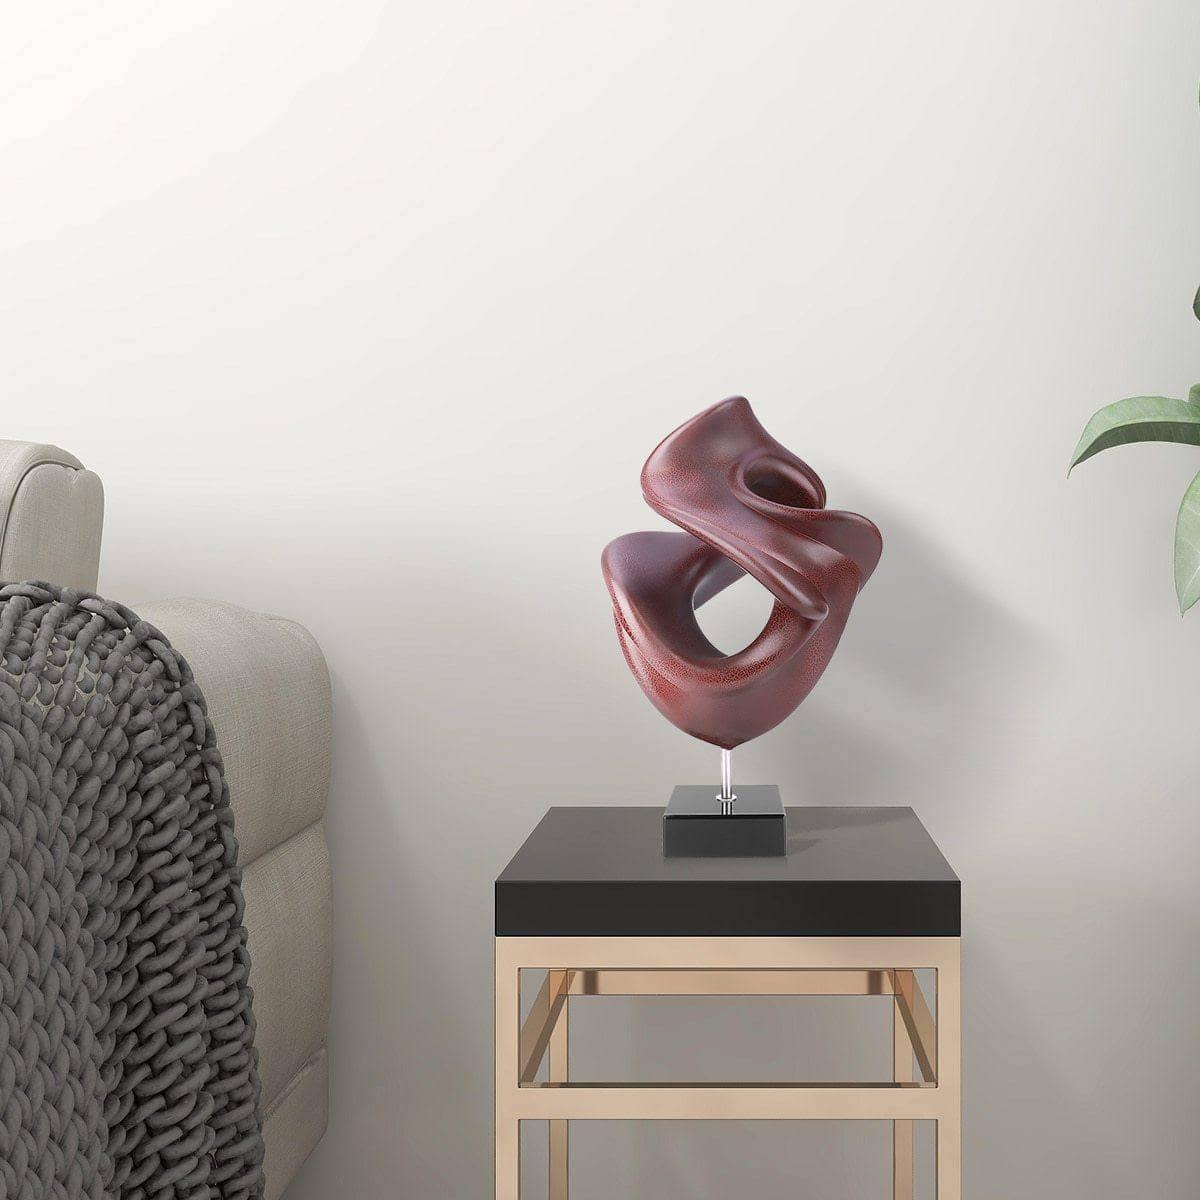 Striking Modern Art Statue: A Bold Statement for Your Space